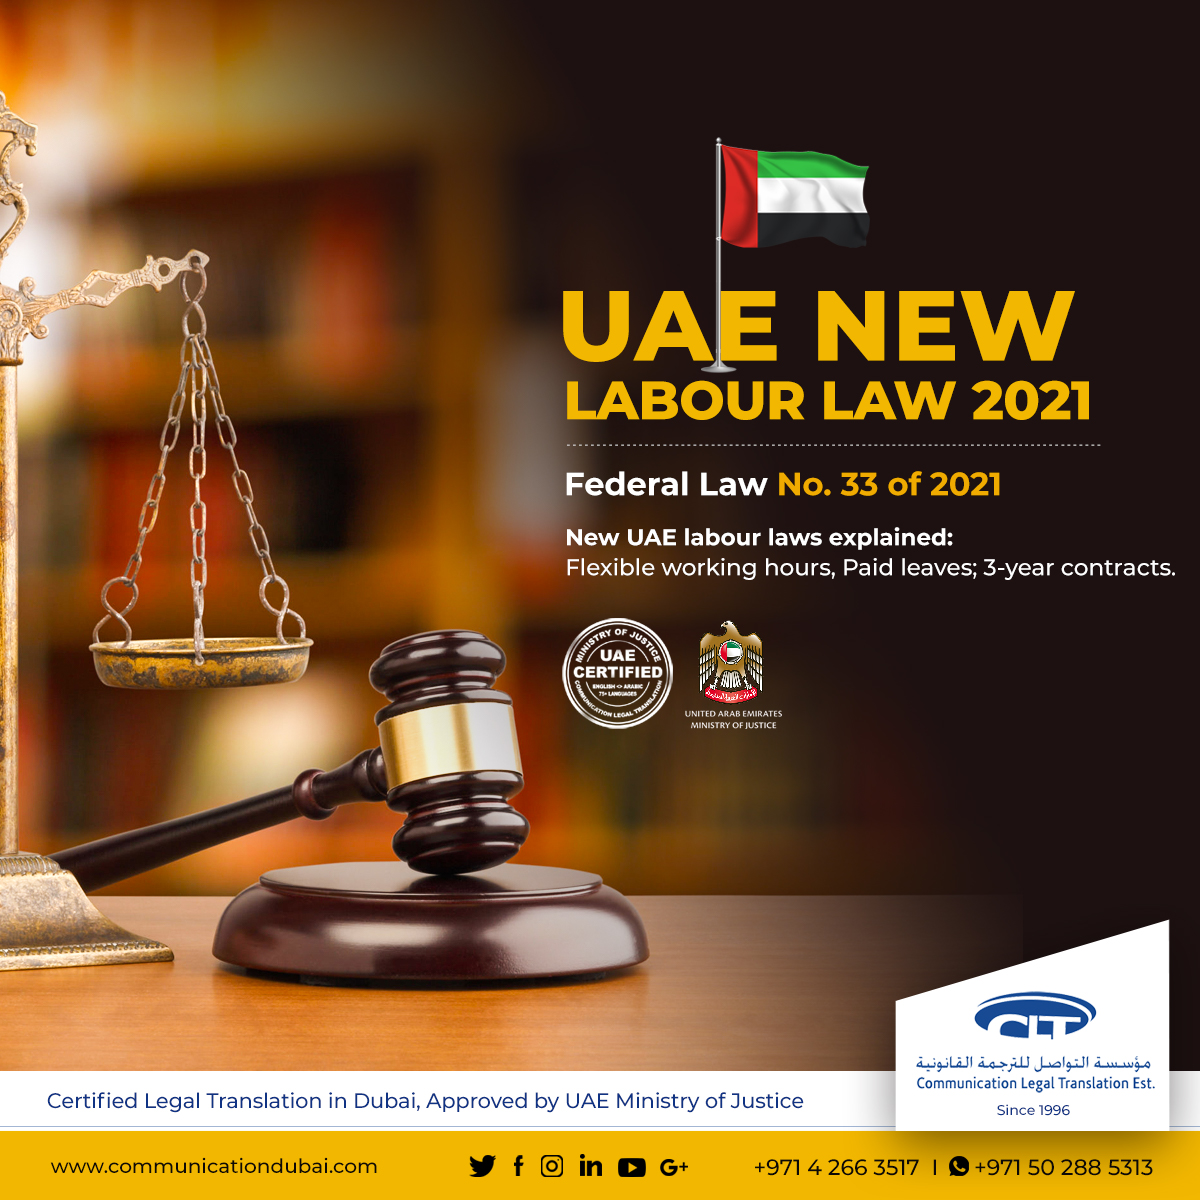 communicationdubai.com/laws/united-ar…
Call / WhatsApp: +971 502885313

#labourlaw #lawyer #law #legal #labour #lawyers #employmentlaw #labourday #labourlaws #lawfirm #covid #lawoffice #labourrights #attorneys #attorney #advocatesindubai #lawyersindubai #lawfirmdubai